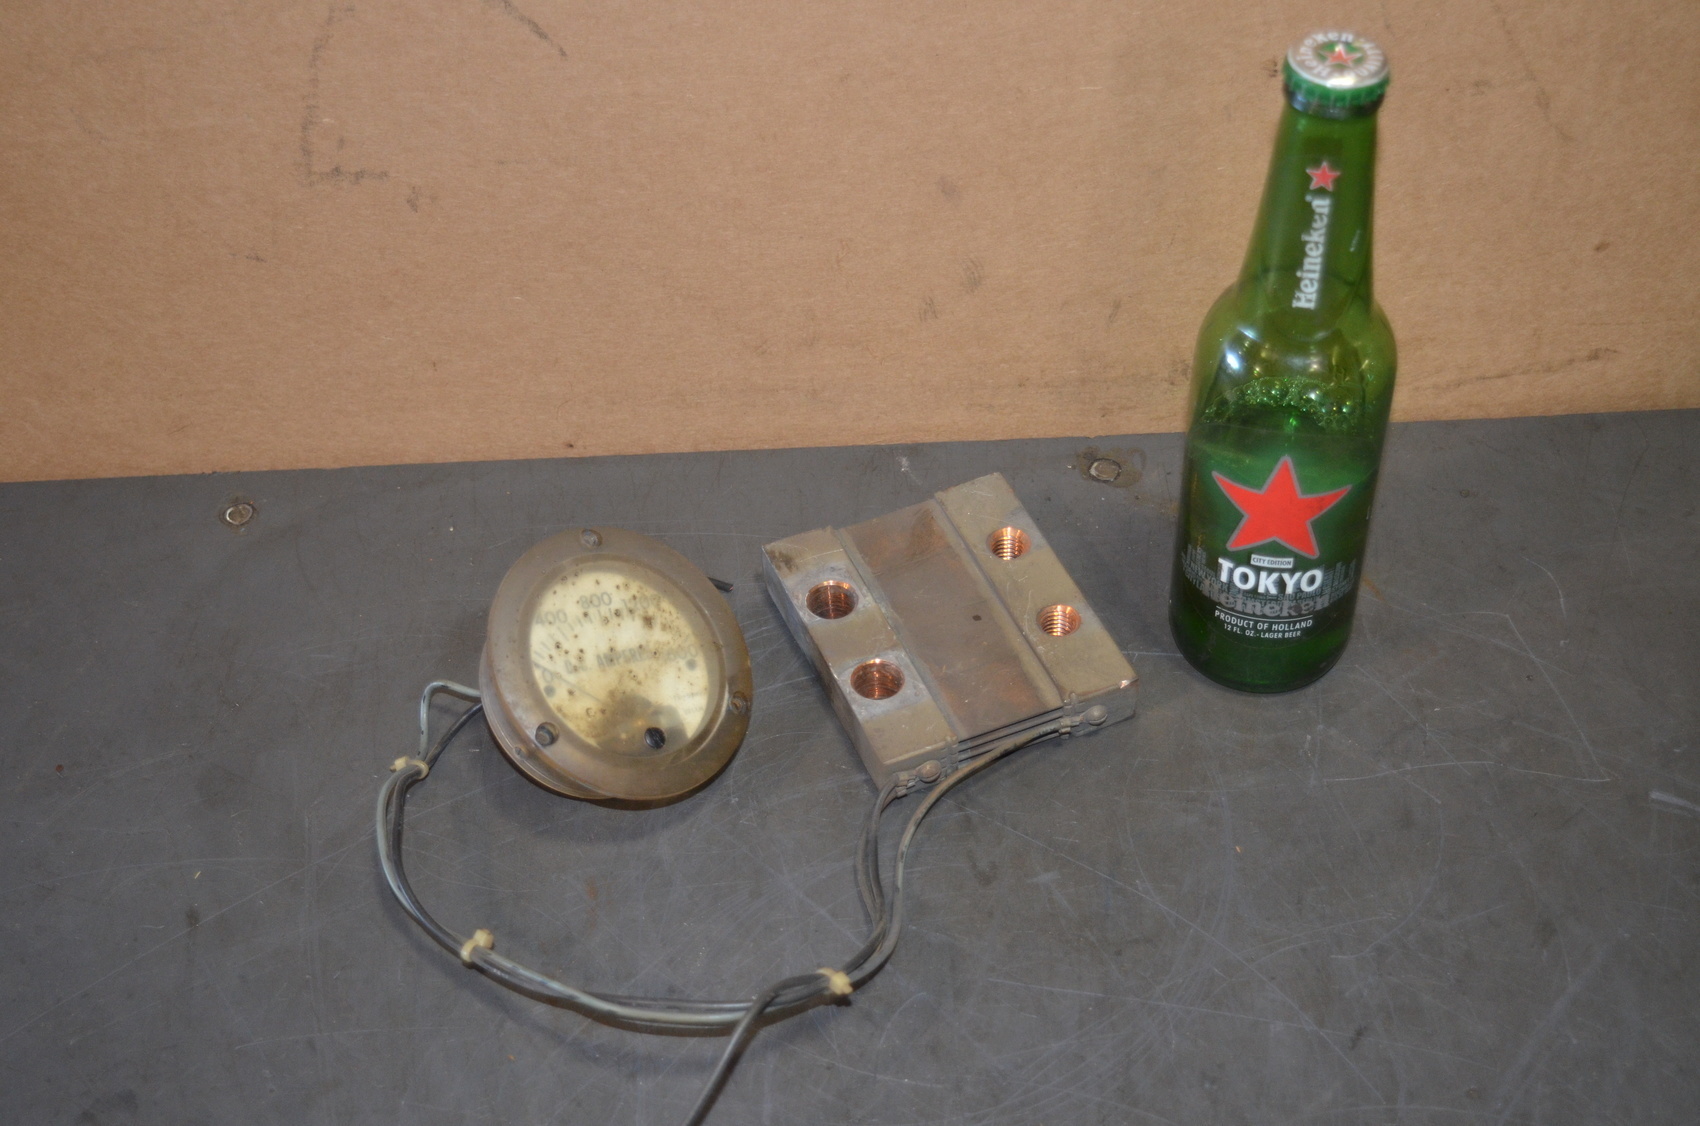 Simpson FS-50 MV Ammeter 1500A with shunt for 1000A welder